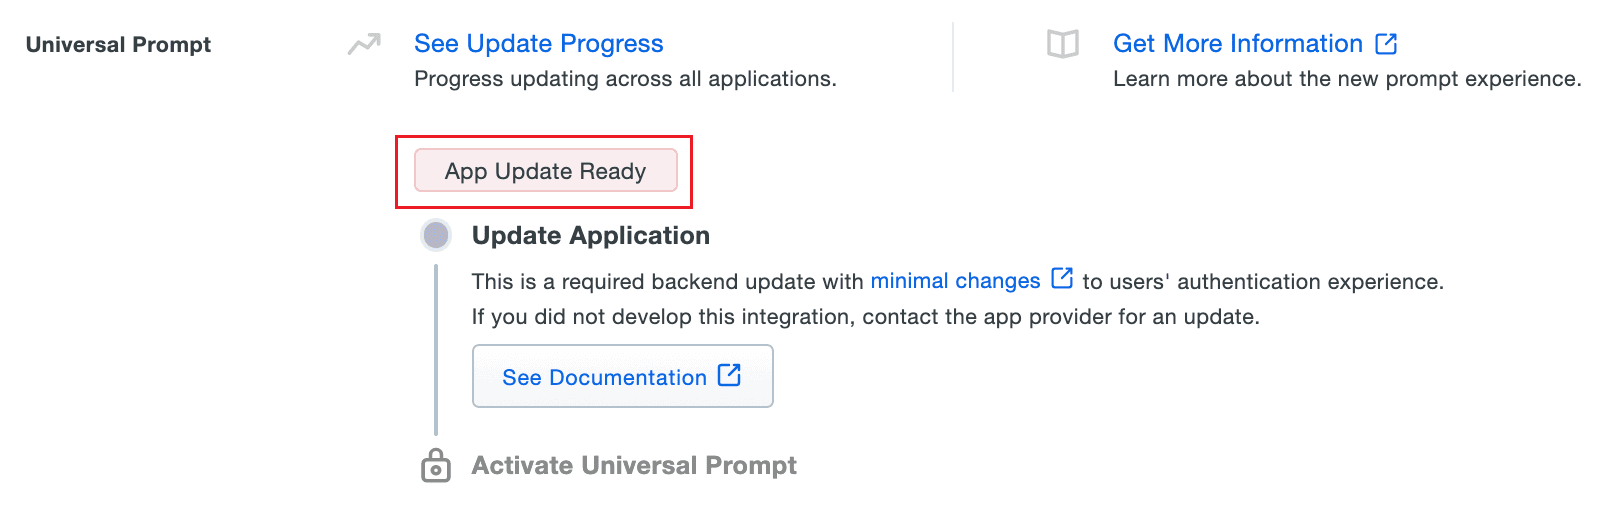 Steps to migrate to the new Universal Prompt